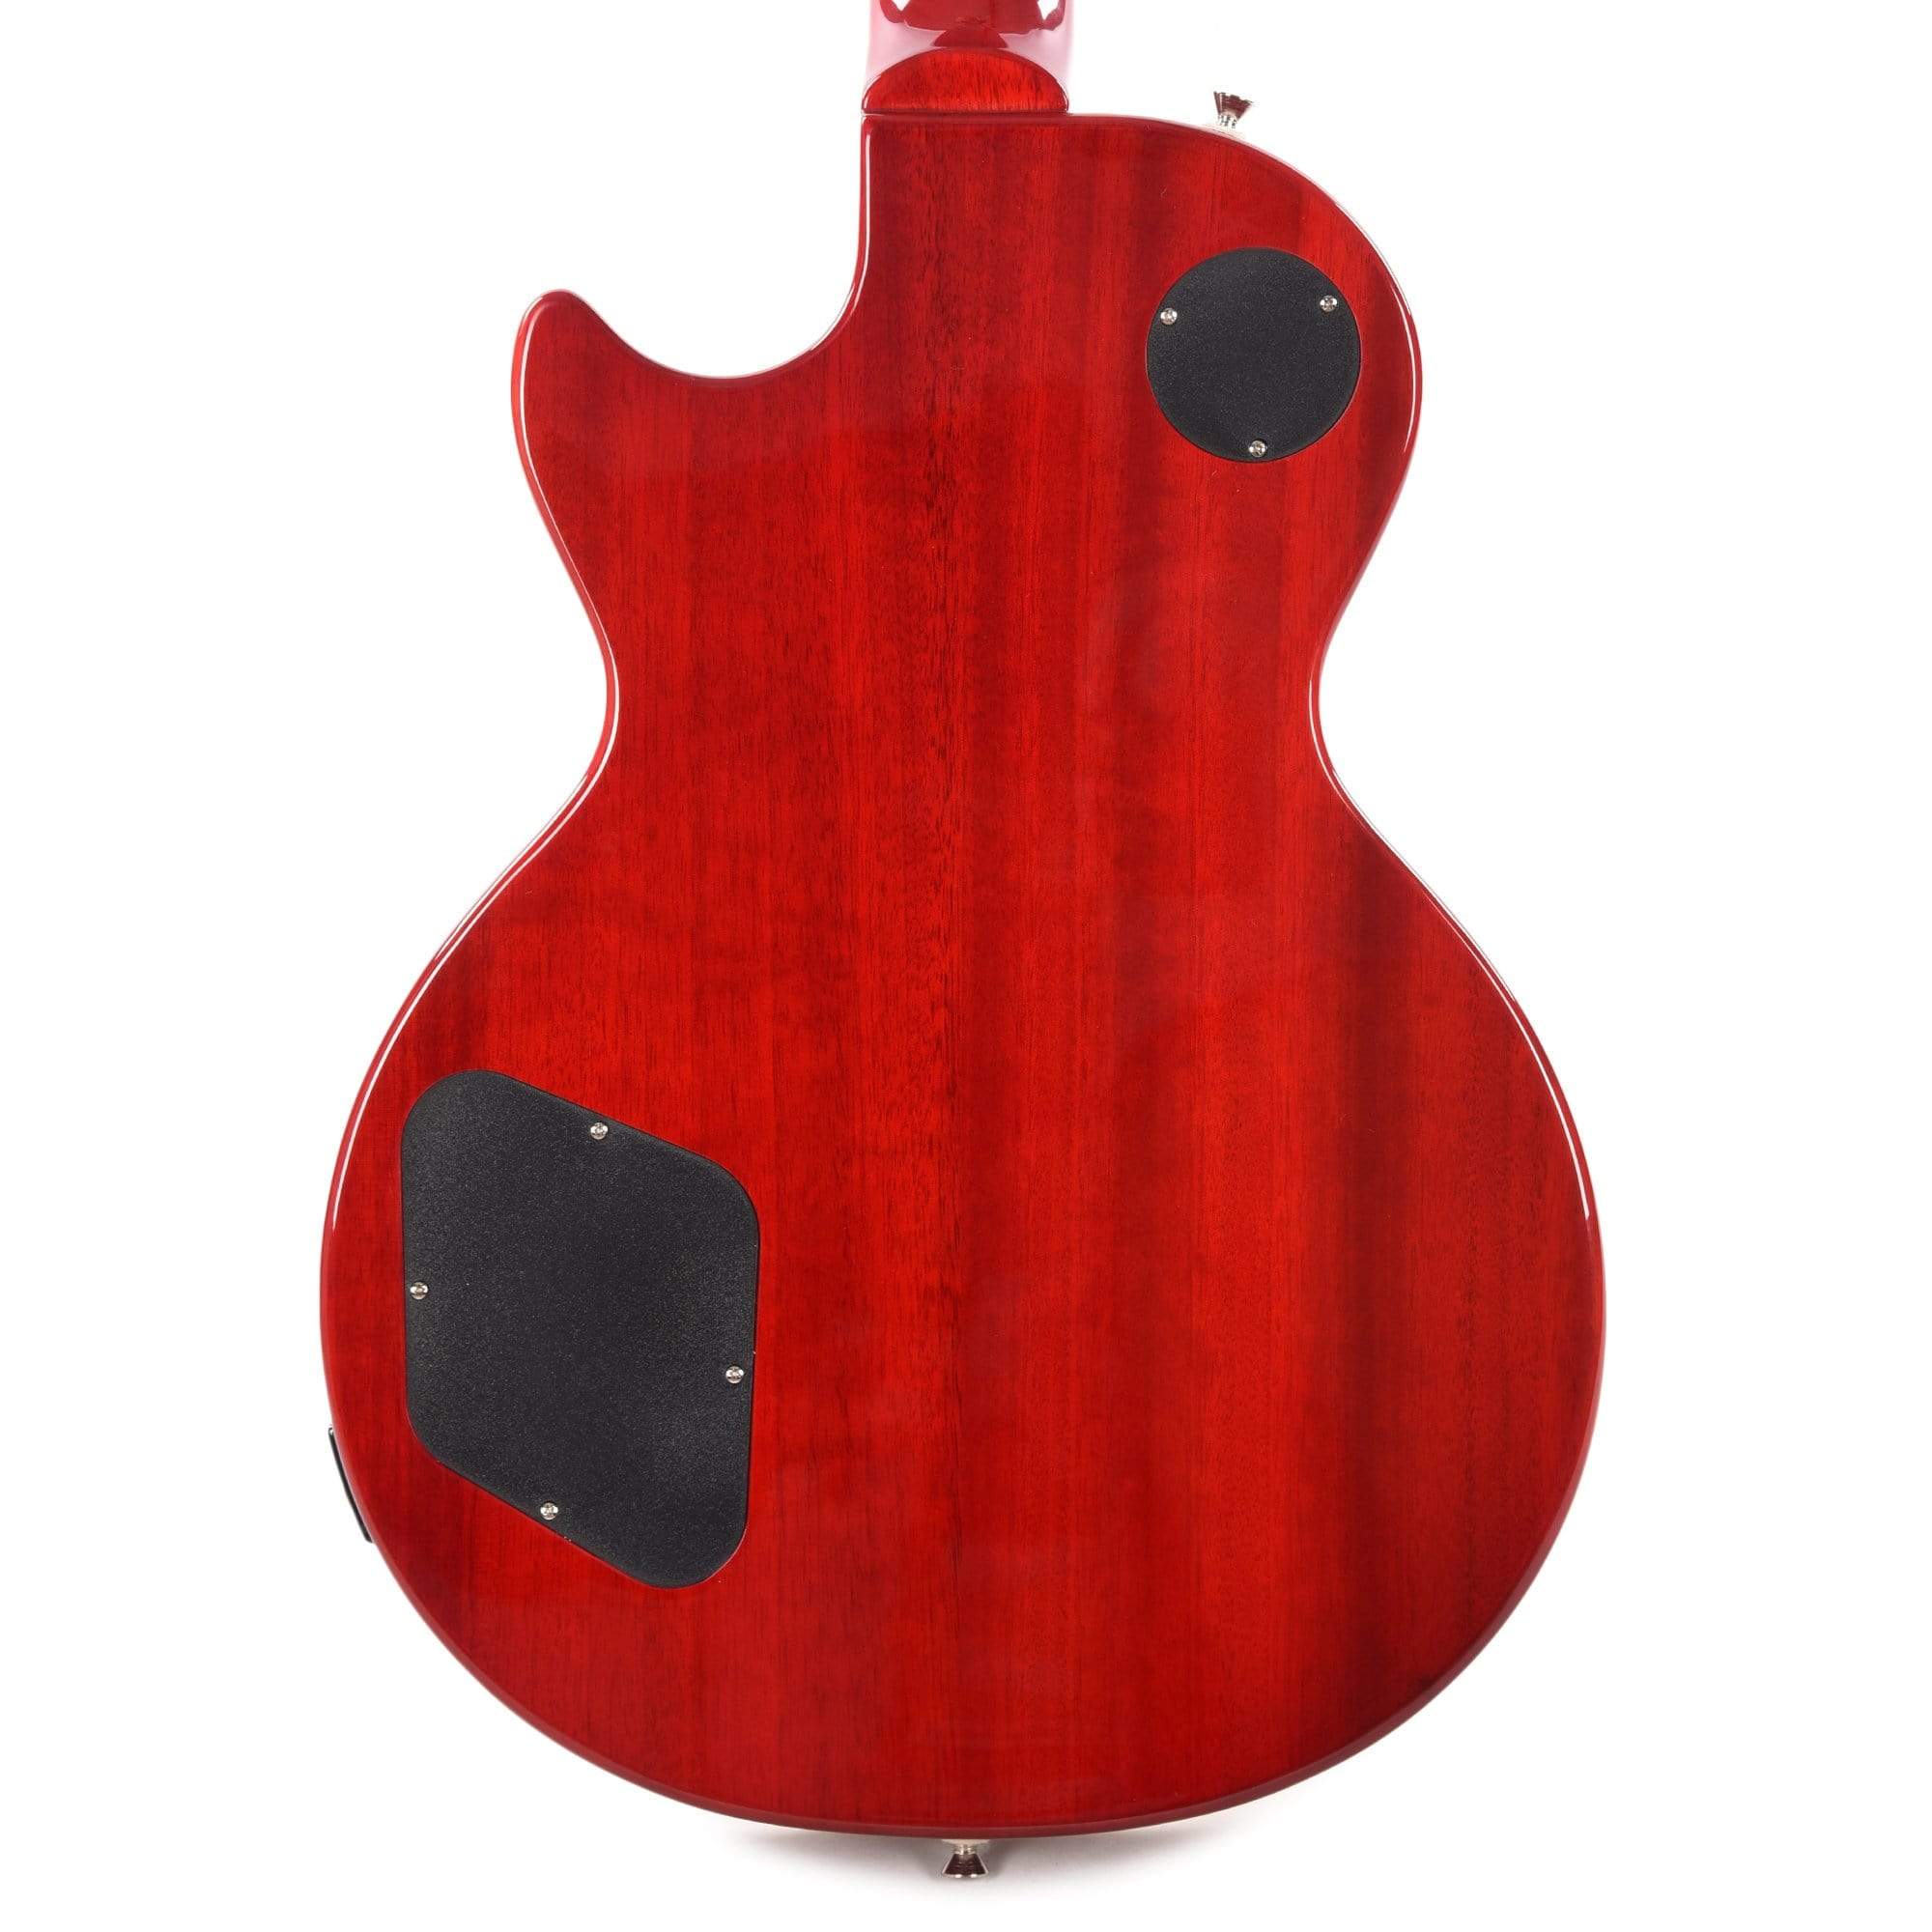 Epiphone Inspired by Gibson Slash Les Paul Vermillion Burst Electric Guitars / Solid Body